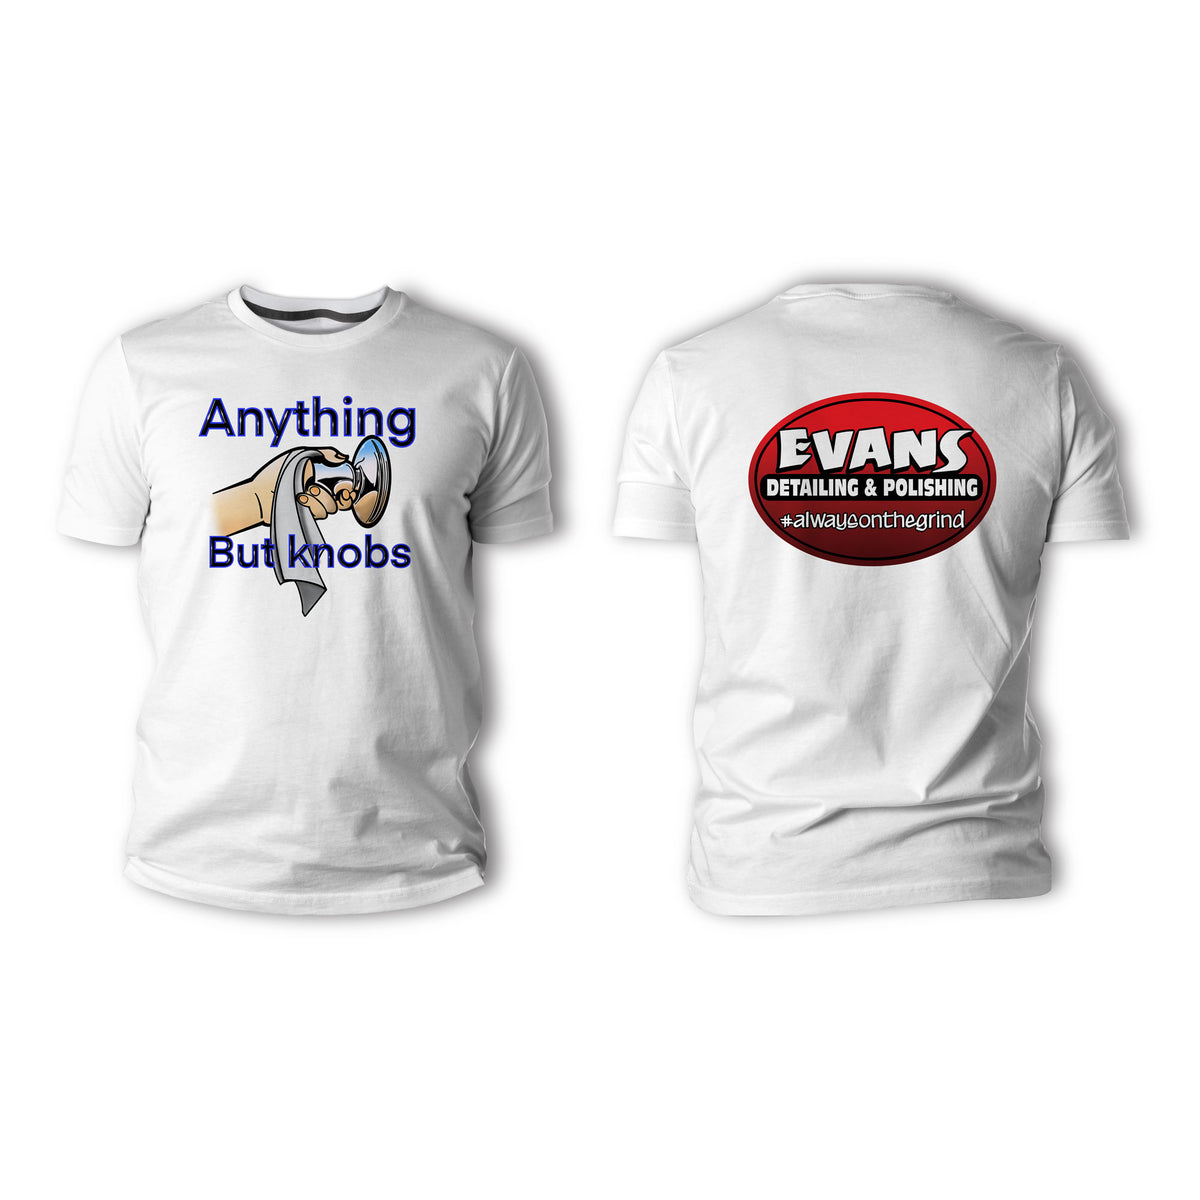 Anything But Knobs Shirts and Hoodies